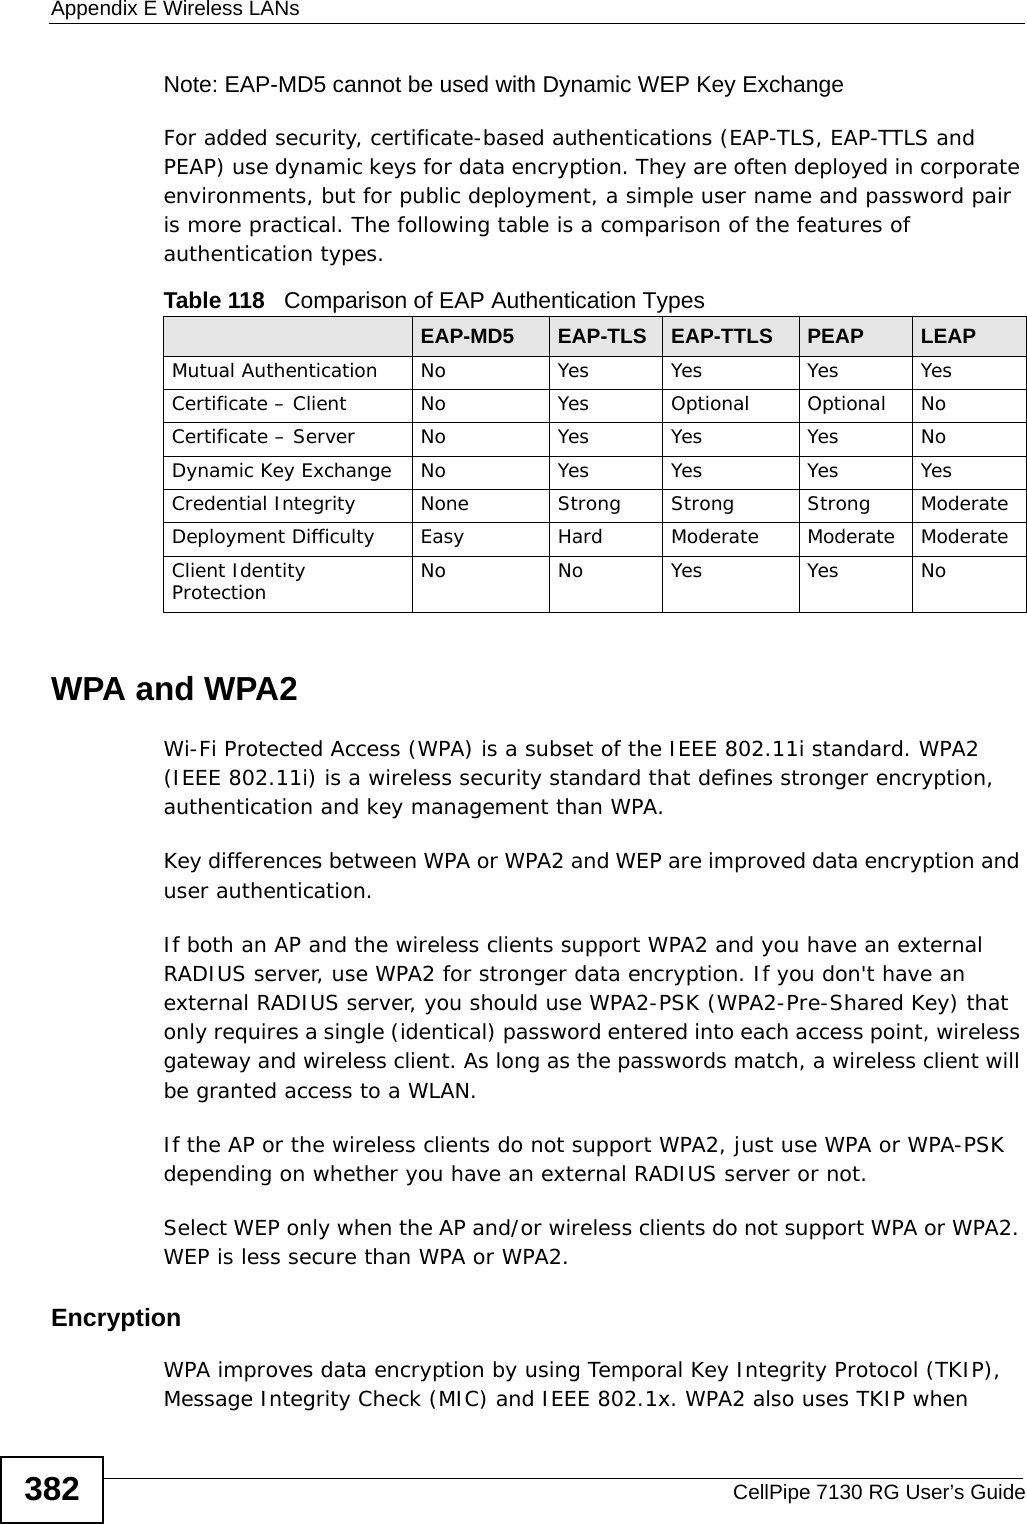 Appendix E Wireless LANsCellPipe 7130 RG User’s Guide382Note: EAP-MD5 cannot be used with Dynamic WEP Key ExchangeFor added security, certificate-based authentications (EAP-TLS, EAP-TTLS and PEAP) use dynamic keys for data encryption. They are often deployed in corporate environments, but for public deployment, a simple user name and password pair is more practical. The following table is a comparison of the features of authentication types.WPA and WPA2Wi-Fi Protected Access (WPA) is a subset of the IEEE 802.11i standard. WPA2 (IEEE 802.11i) is a wireless security standard that defines stronger encryption, authentication and key management than WPA. Key differences between WPA or WPA2 and WEP are improved data encryption and user authentication.If both an AP and the wireless clients support WPA2 and you have an external RADIUS server, use WPA2 for stronger data encryption. If you don&apos;t have an external RADIUS server, you should use WPA2-PSK (WPA2-Pre-Shared Key) that only requires a single (identical) password entered into each access point, wireless gateway and wireless client. As long as the passwords match, a wireless client will be granted access to a WLAN. If the AP or the wireless clients do not support WPA2, just use WPA or WPA-PSK depending on whether you have an external RADIUS server or not.Select WEP only when the AP and/or wireless clients do not support WPA or WPA2. WEP is less secure than WPA or WPA2.Encryption WPA improves data encryption by using Temporal Key Integrity Protocol (TKIP), Message Integrity Check (MIC) and IEEE 802.1x. WPA2 also uses TKIP when Table 118   Comparison of EAP Authentication TypesEAP-MD5 EAP-TLS EAP-TTLS PEAP LEAPMutual Authentication No Yes Yes Yes YesCertificate – Client No Yes Optional Optional NoCertificate – Server No Yes Yes Yes NoDynamic Key Exchange No Yes Yes Yes YesCredential Integrity None Strong Strong Strong ModerateDeployment Difficulty Easy Hard Moderate Moderate ModerateClient Identity Protection No No Yes Yes No